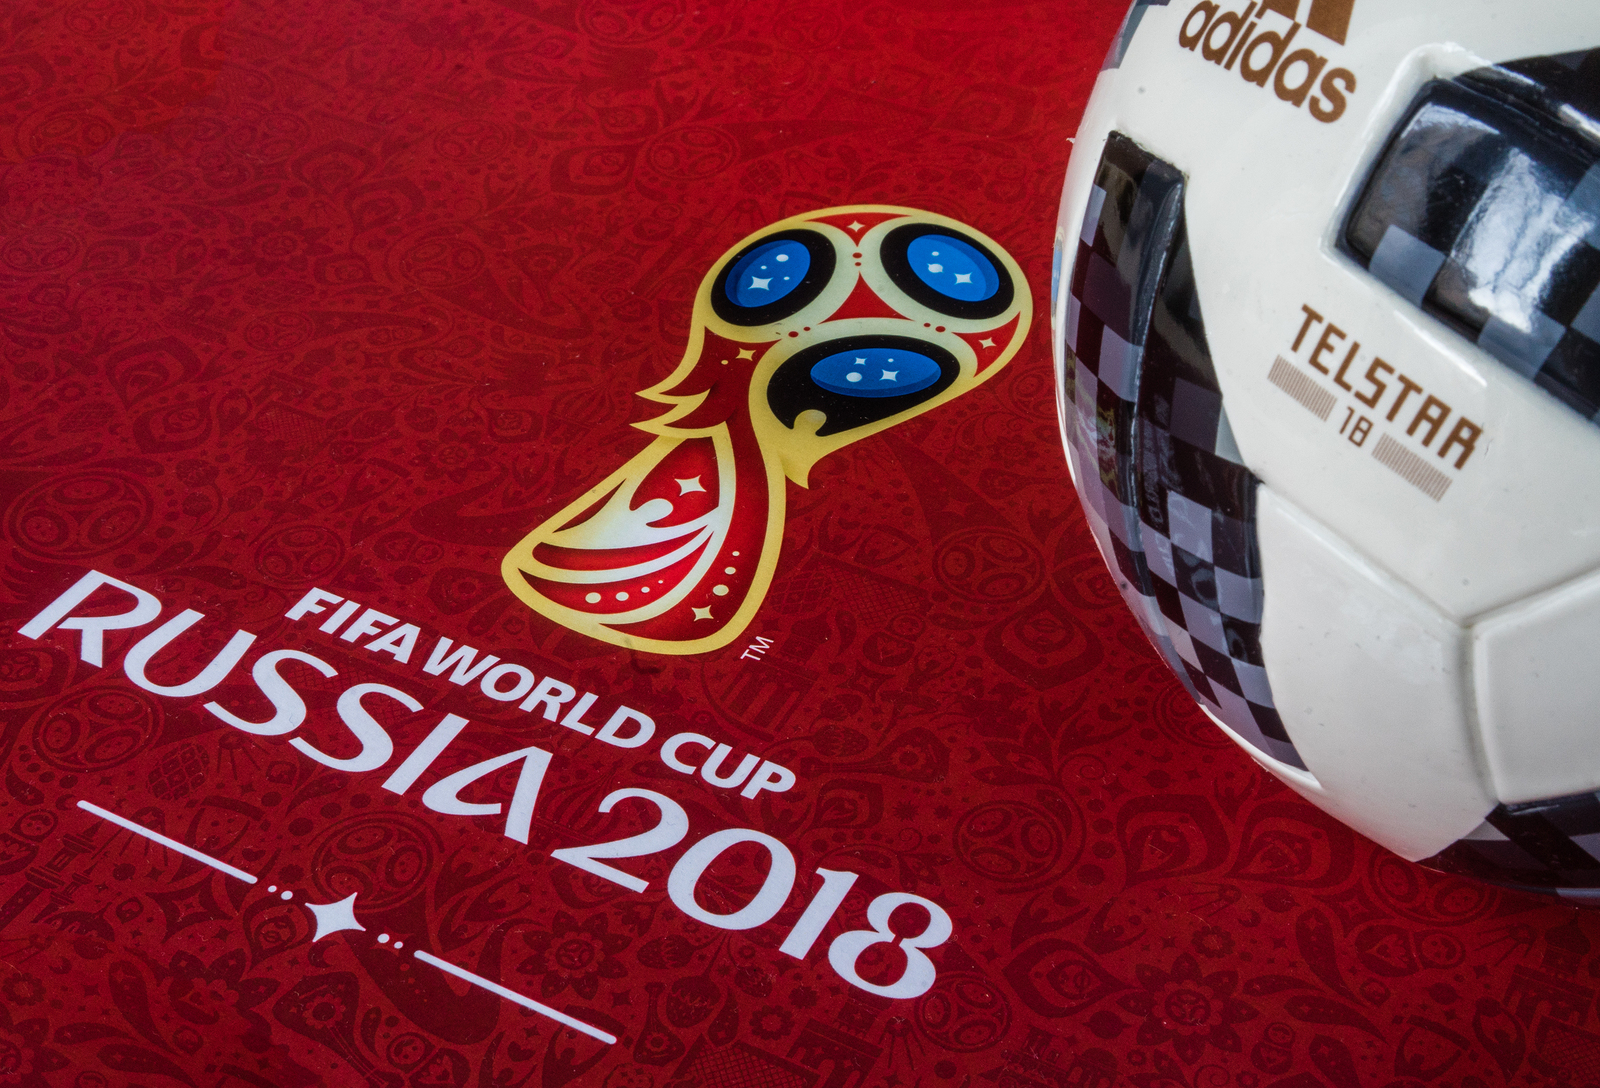 Guidance For The 2018 FIFA World Cup In Russia